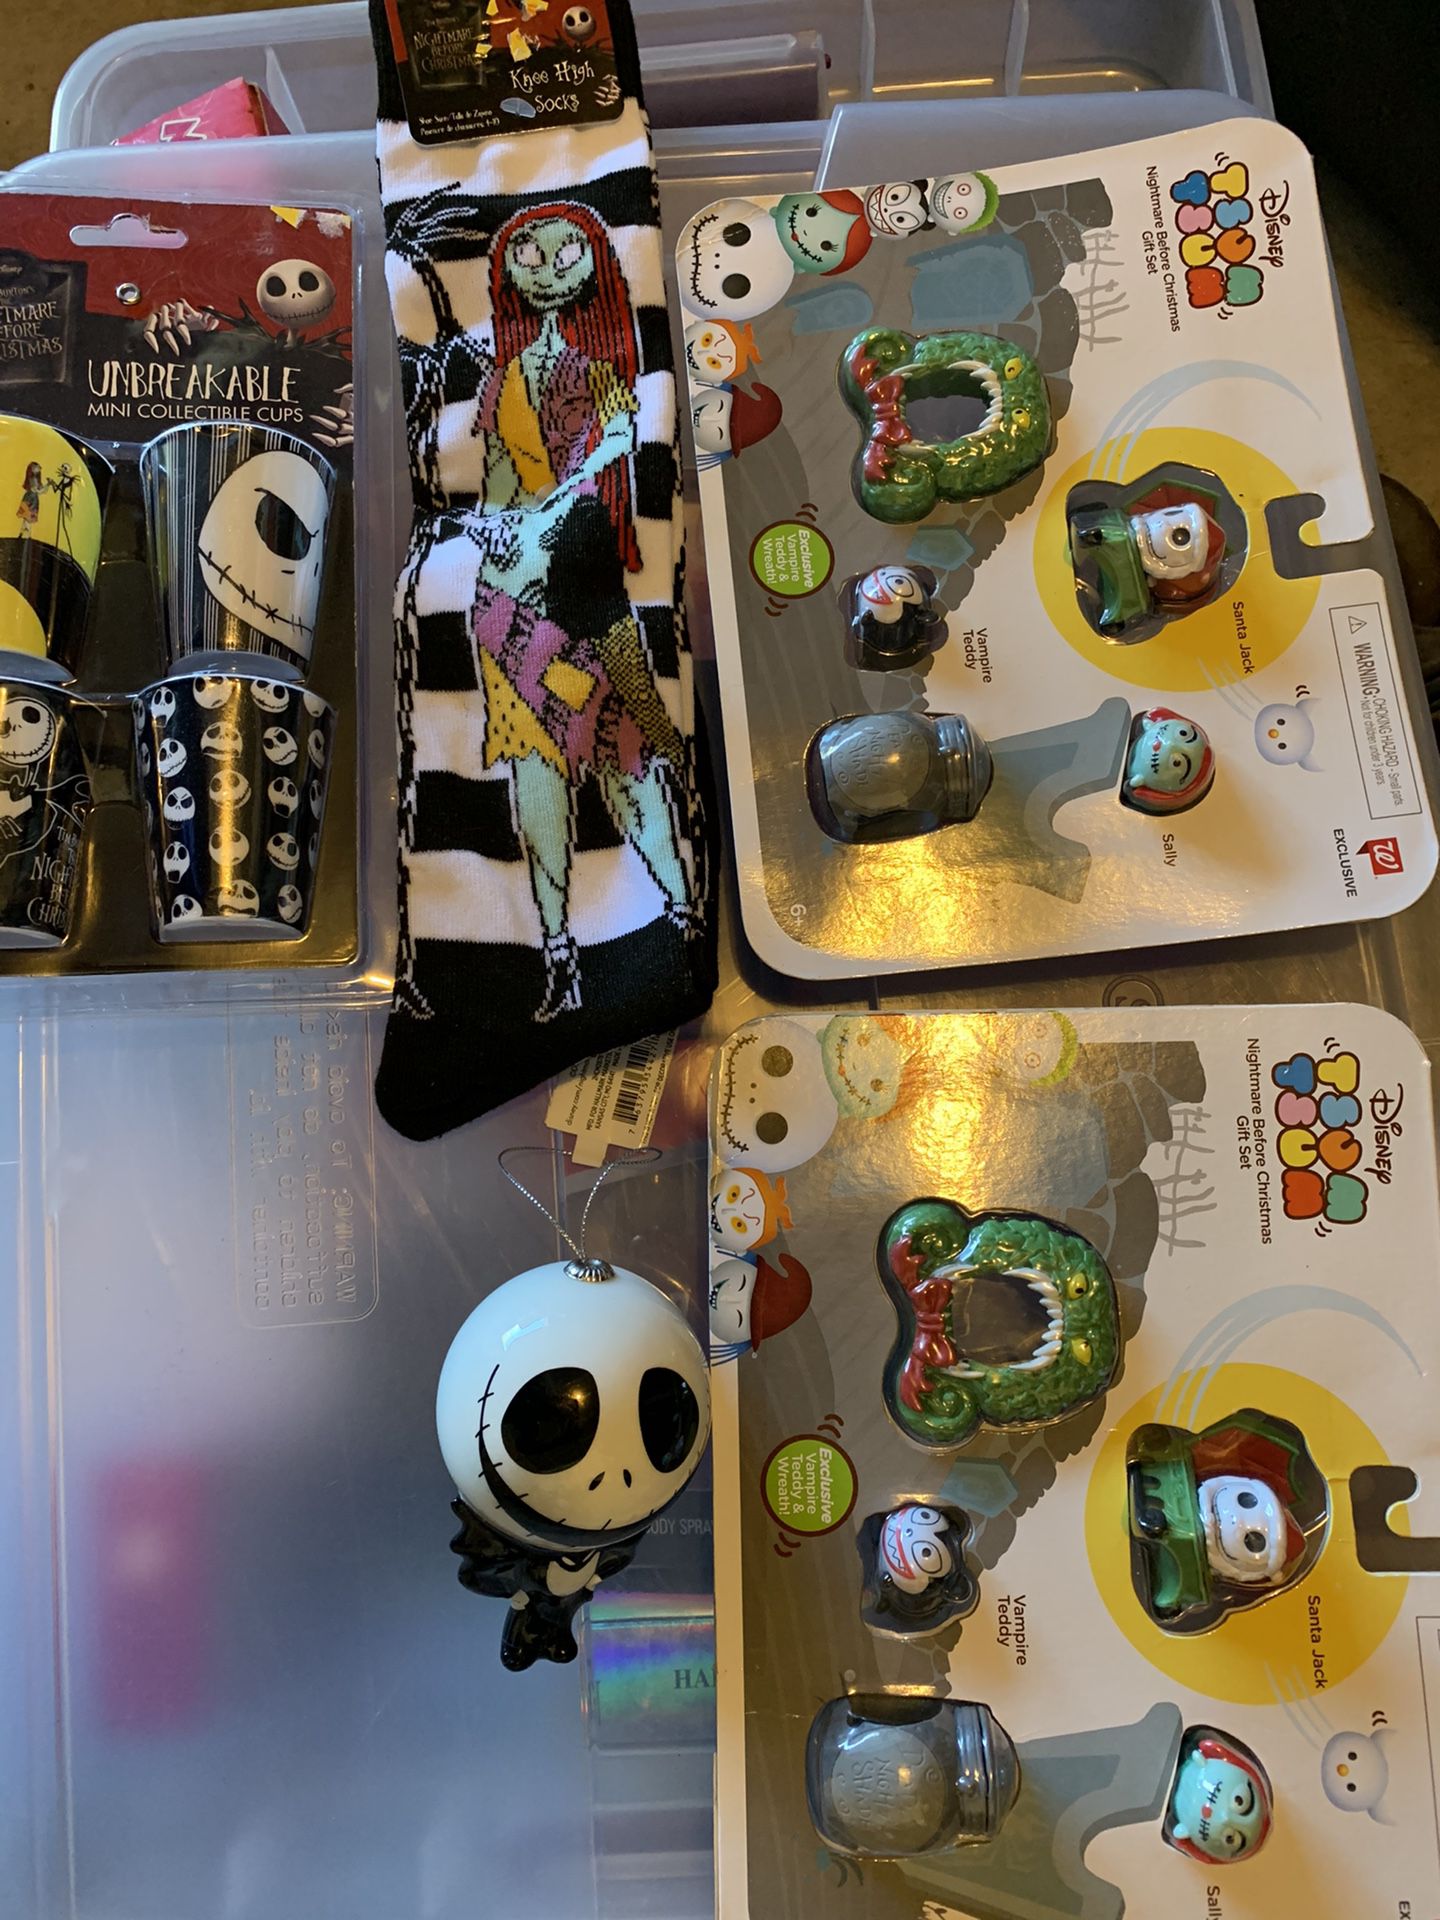 Nightmare before Christmas collectibles and